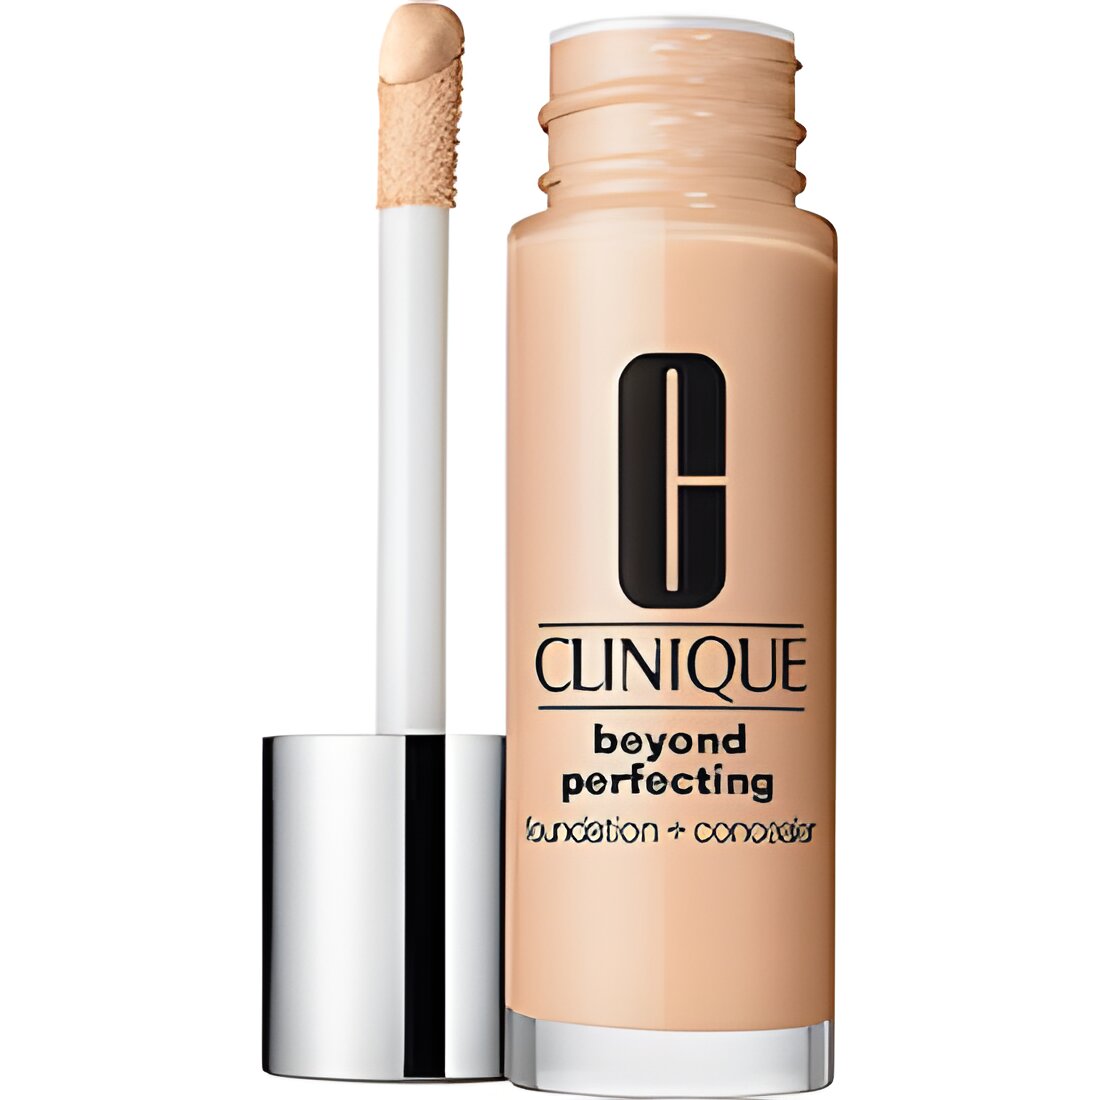 Free Clinique Beyond Perfectingâ„¢ Foundation + Concealer Sample